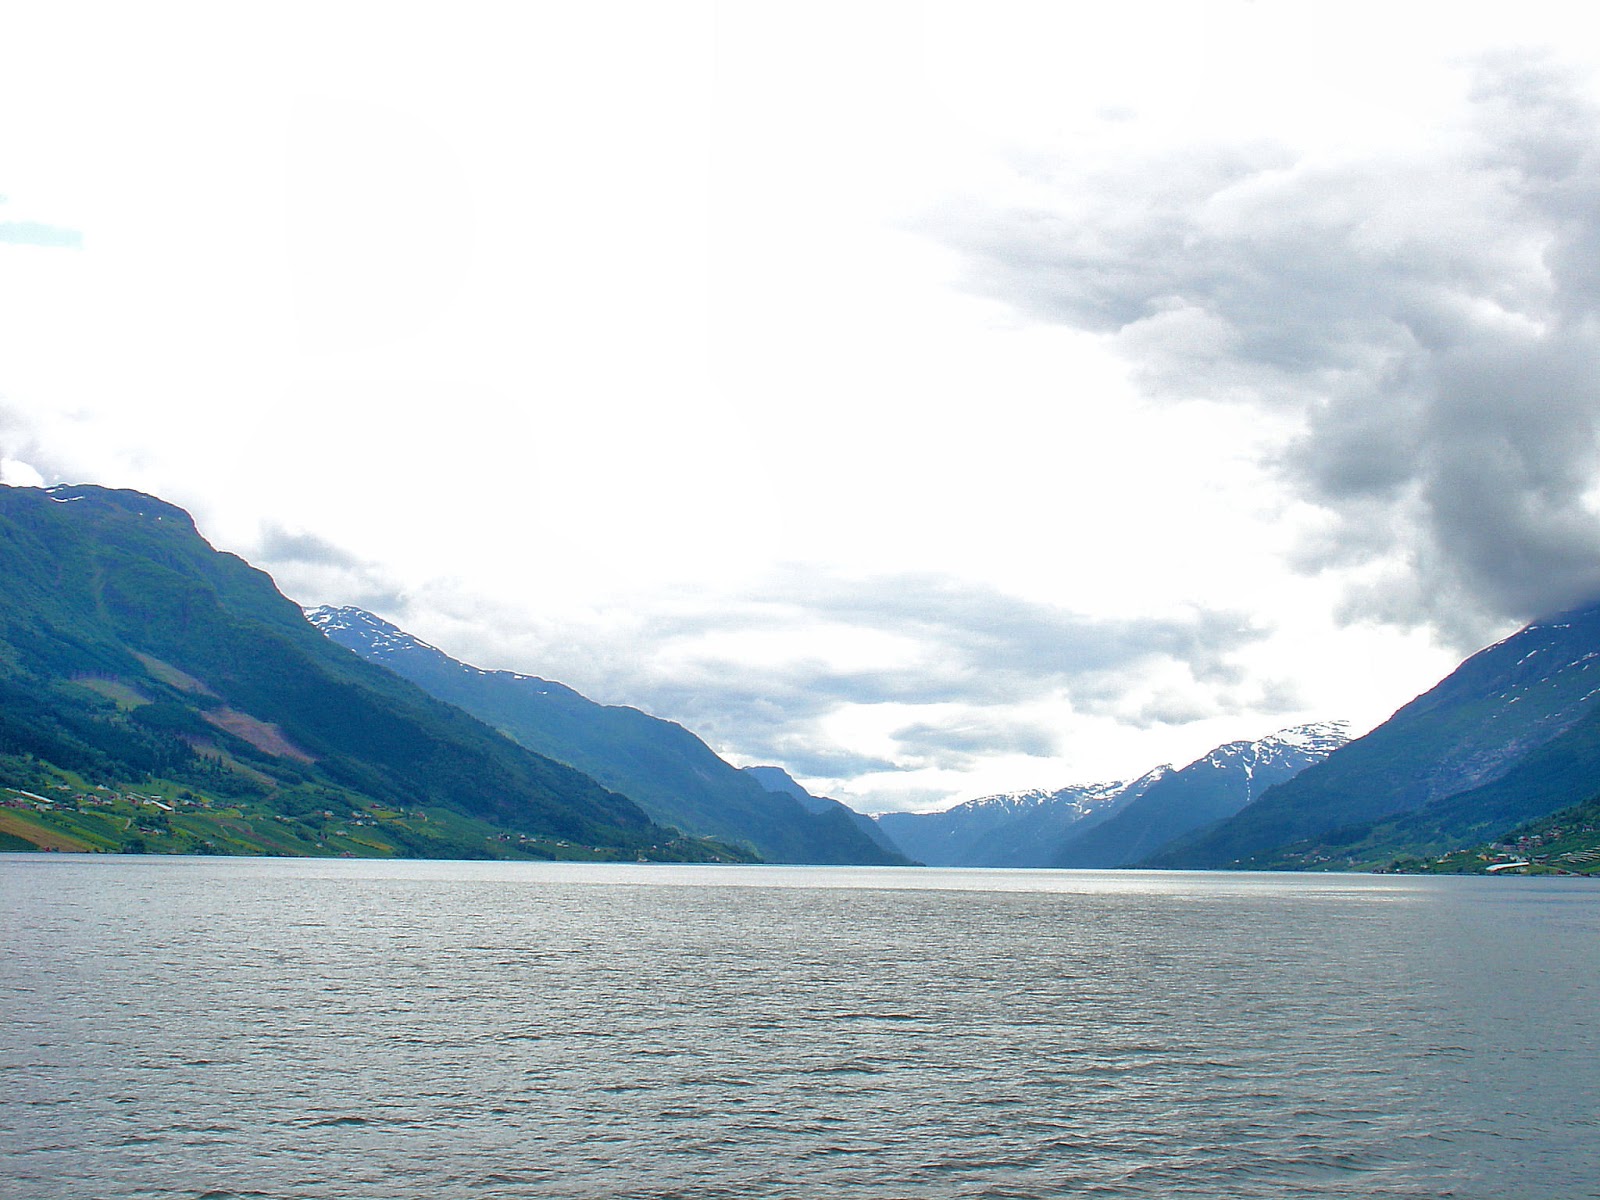 Another view of the Hardangerfjord or Queen's Fjord.